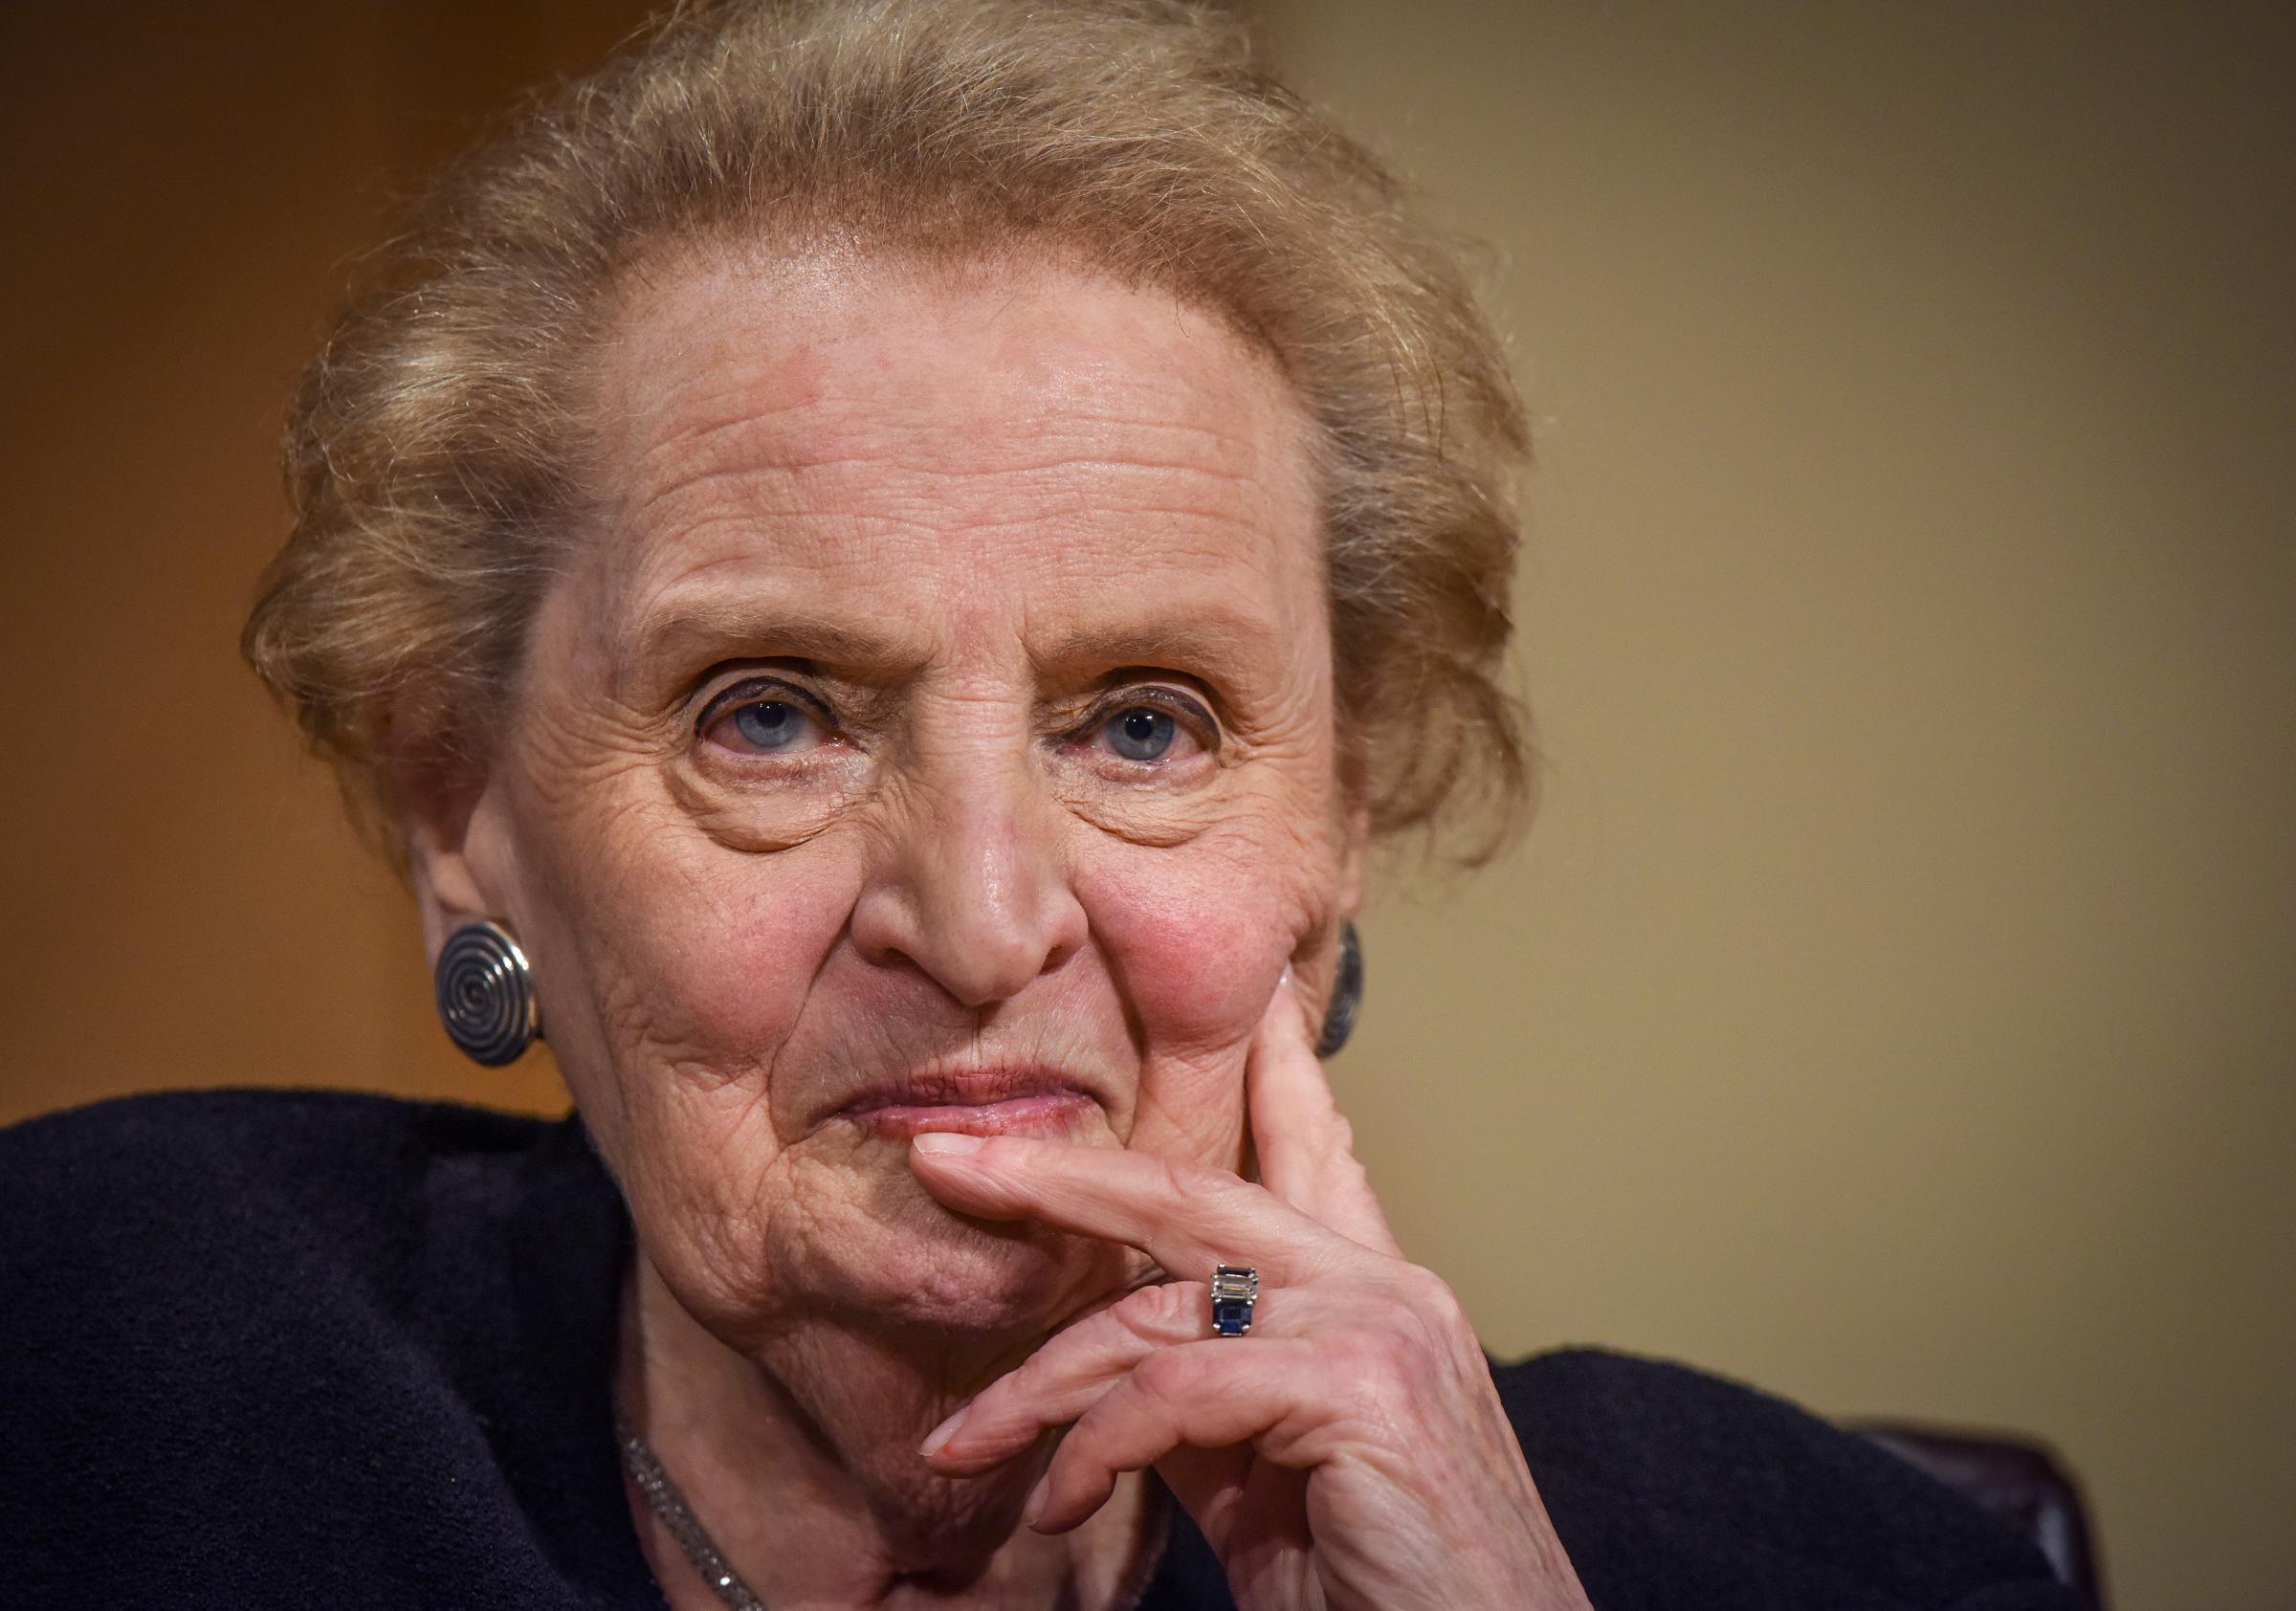 Former Secretary of State Madeleine Albright with her hand on her head